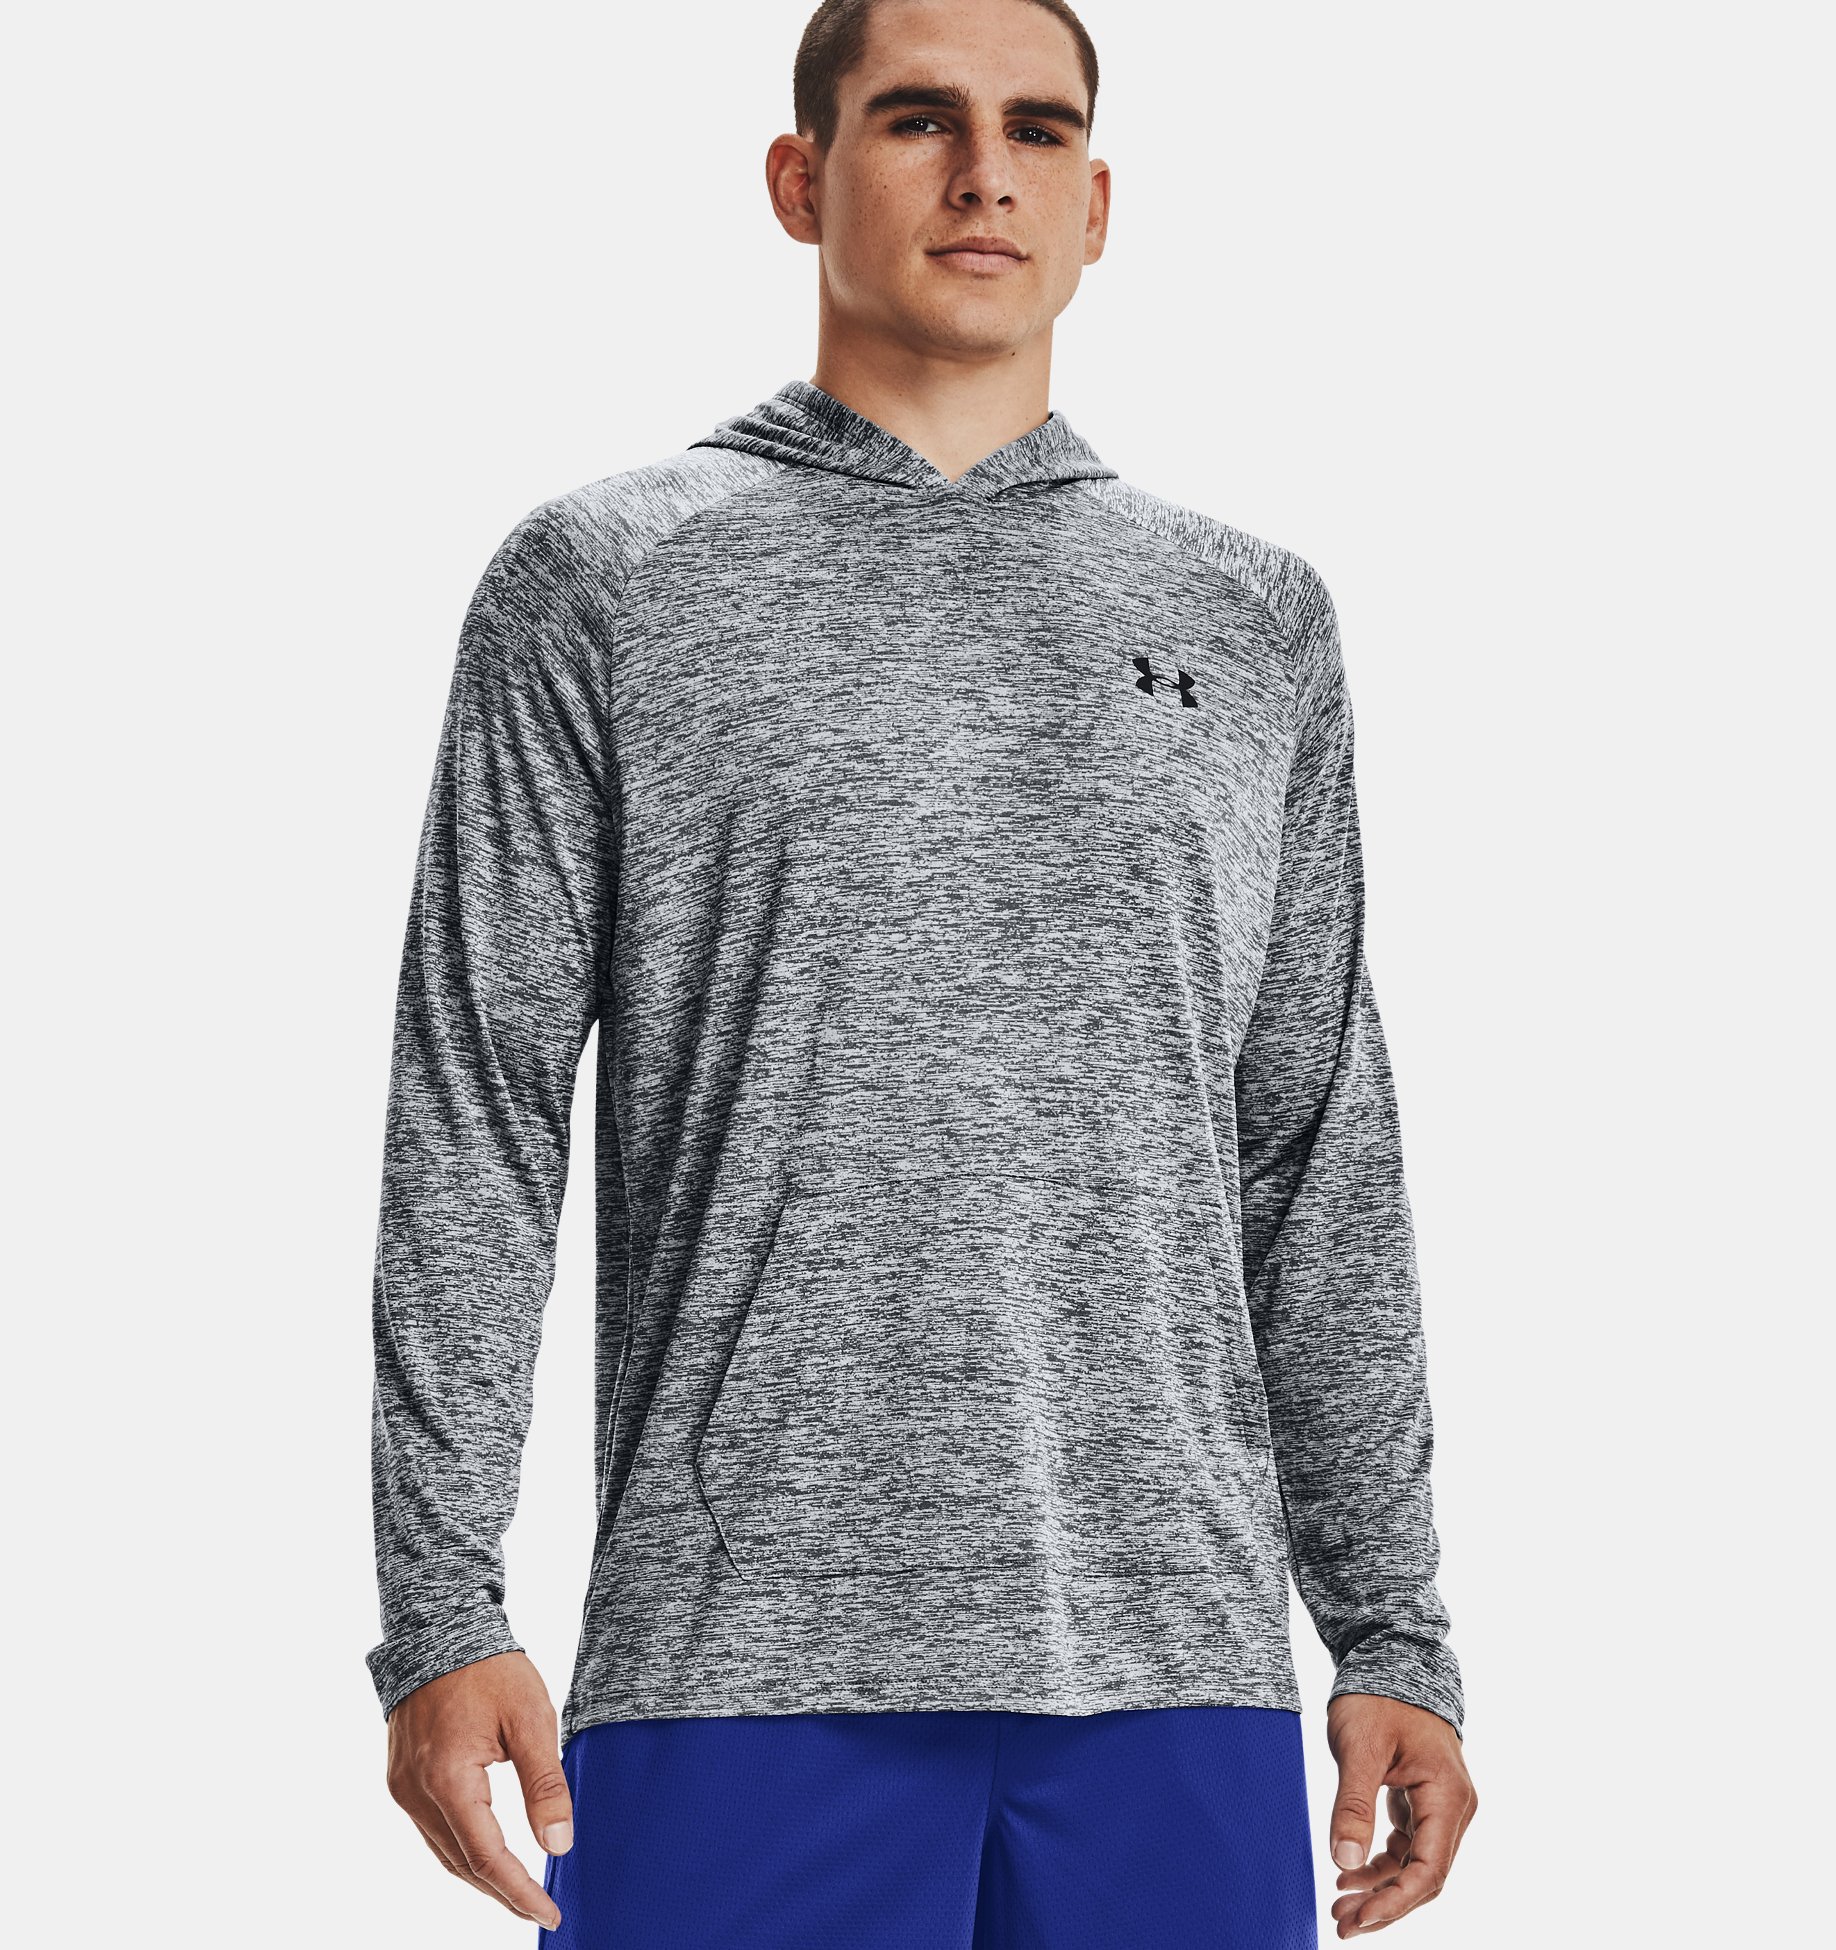 Under Armour 1328703 Men's Athletic UA Tech 2.0 Hoodie Long Sleeve Hooded Shirt 